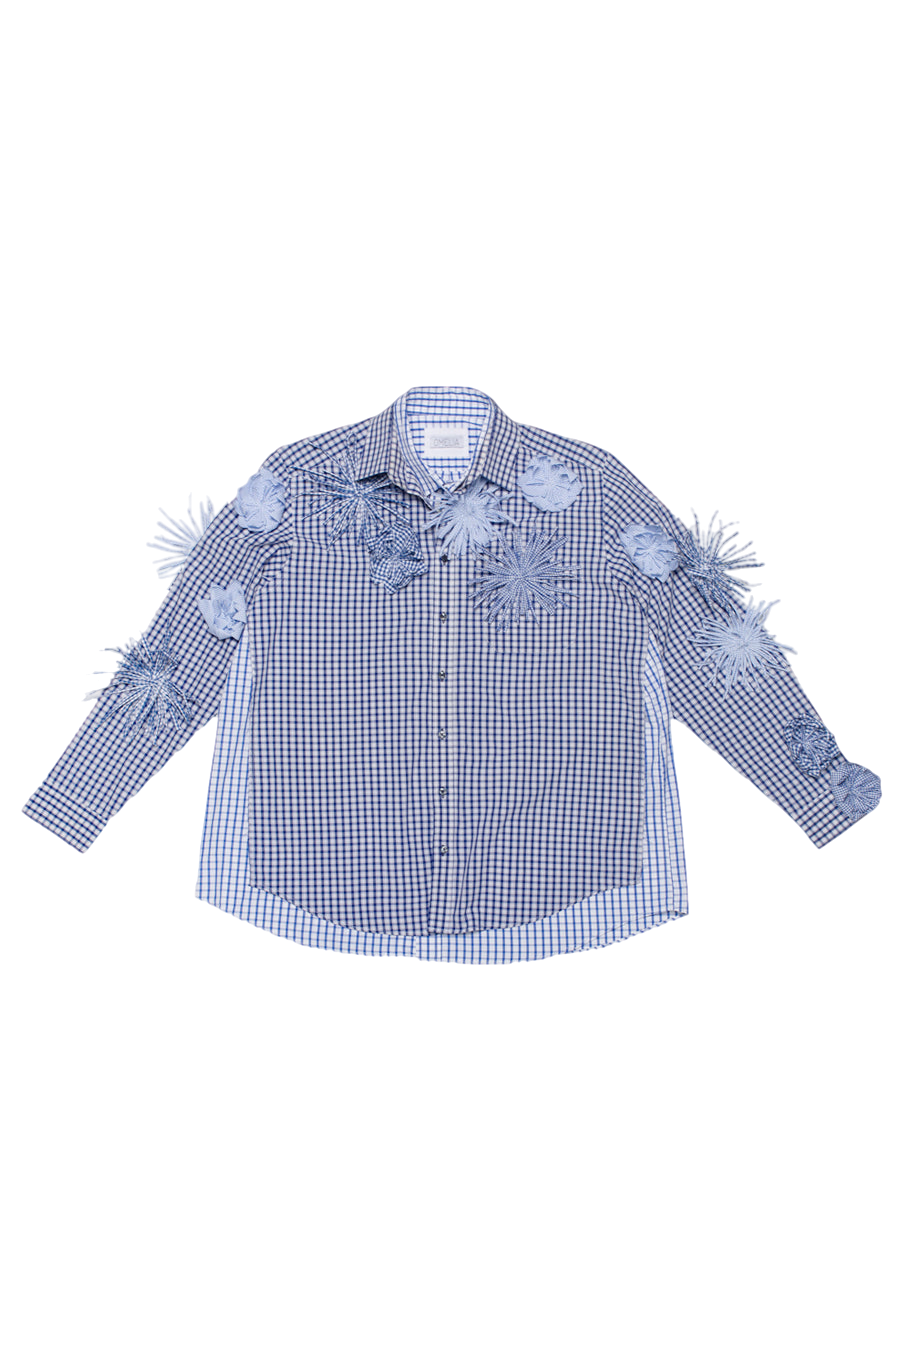 Omelia Redesigned Shirt 98 Blc In Blue